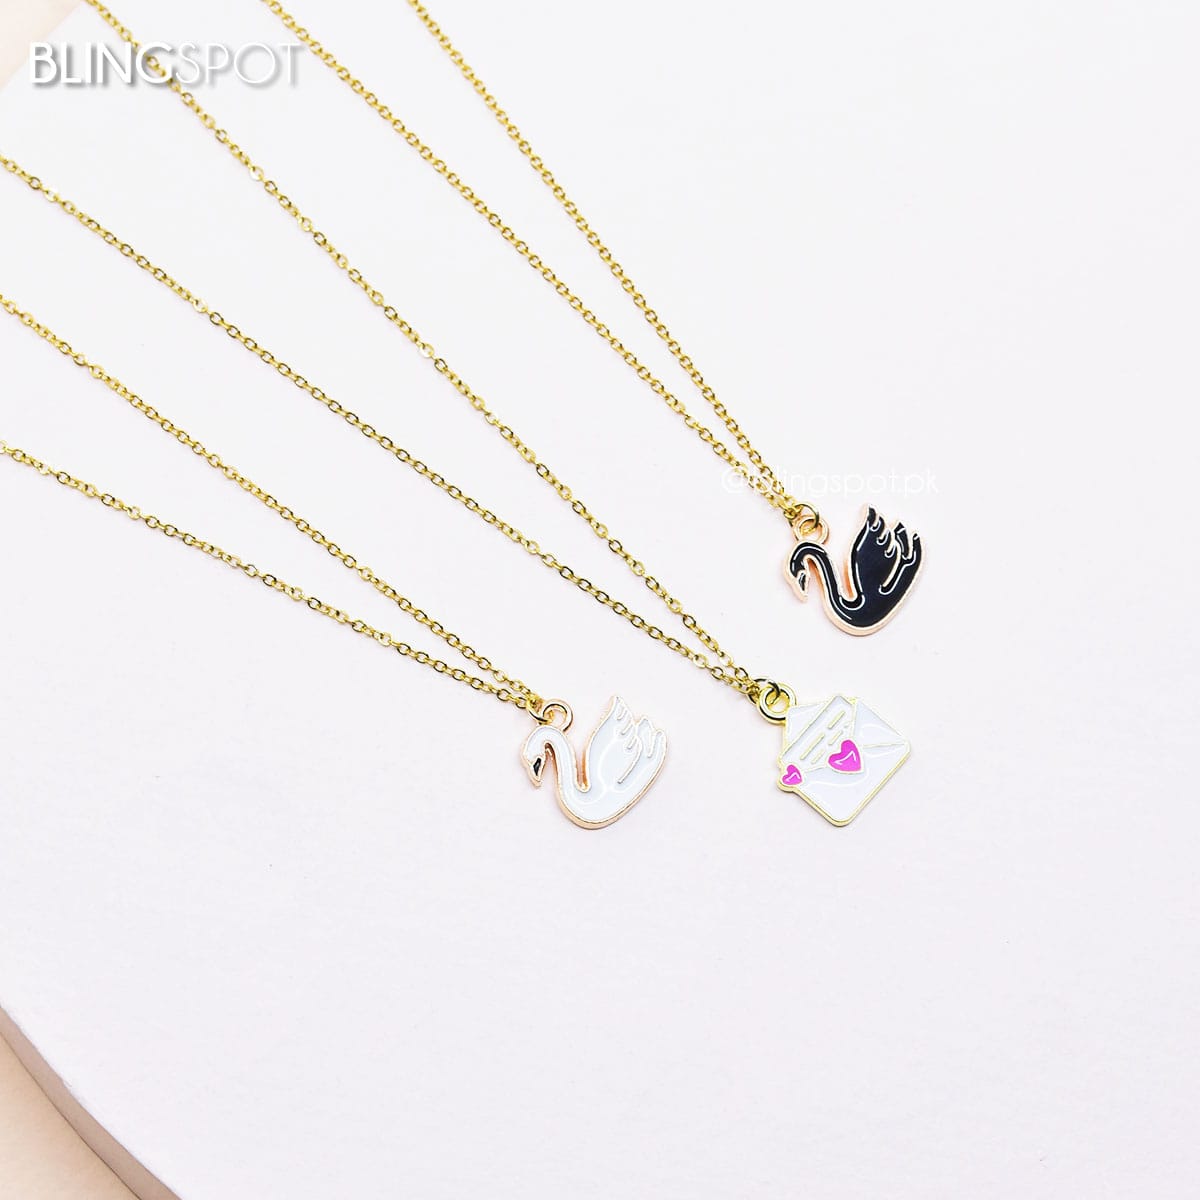 Swan Love - Necklace